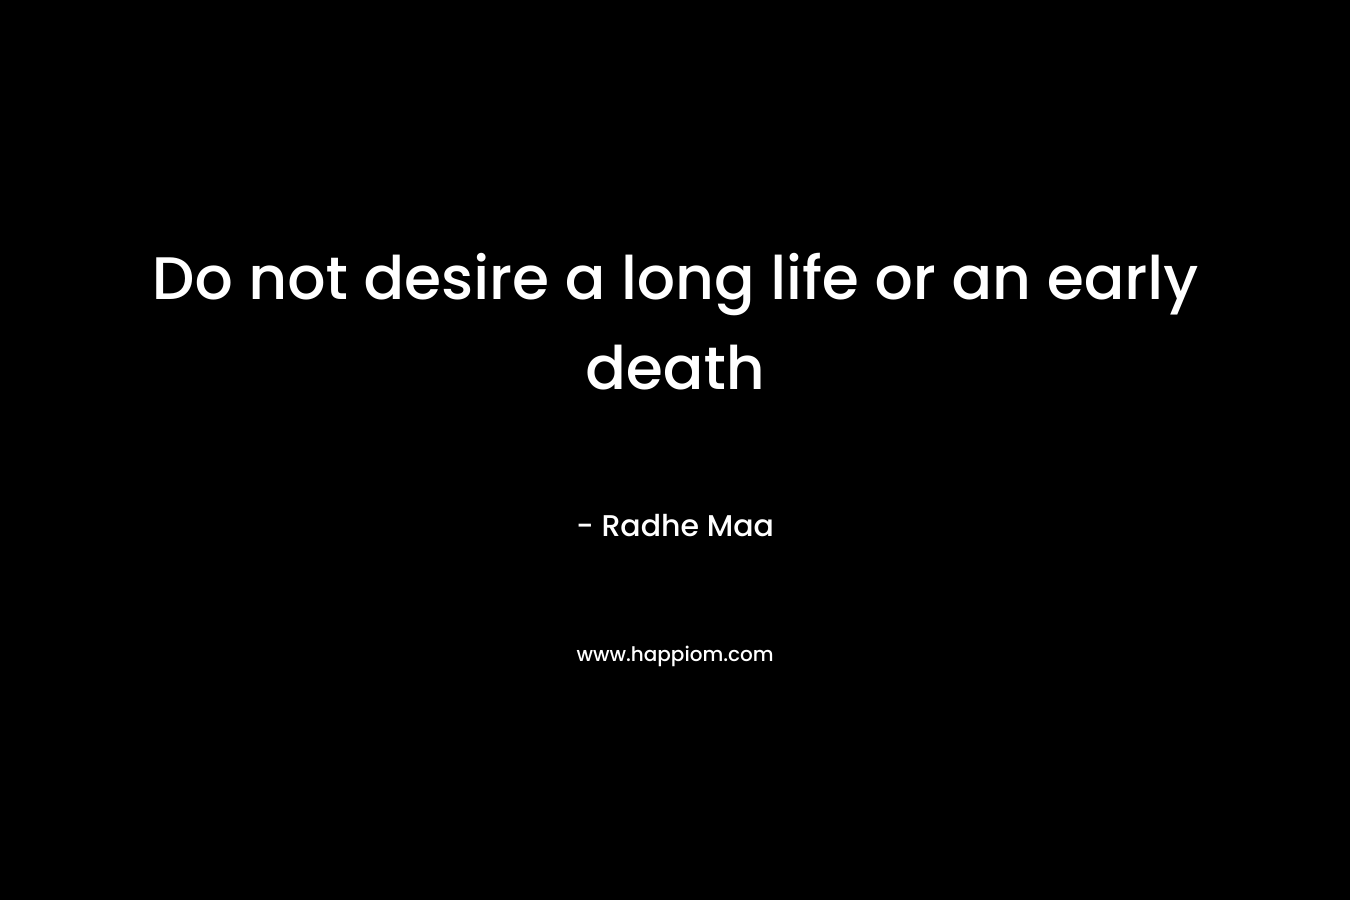 Do not desire a long life or an early death